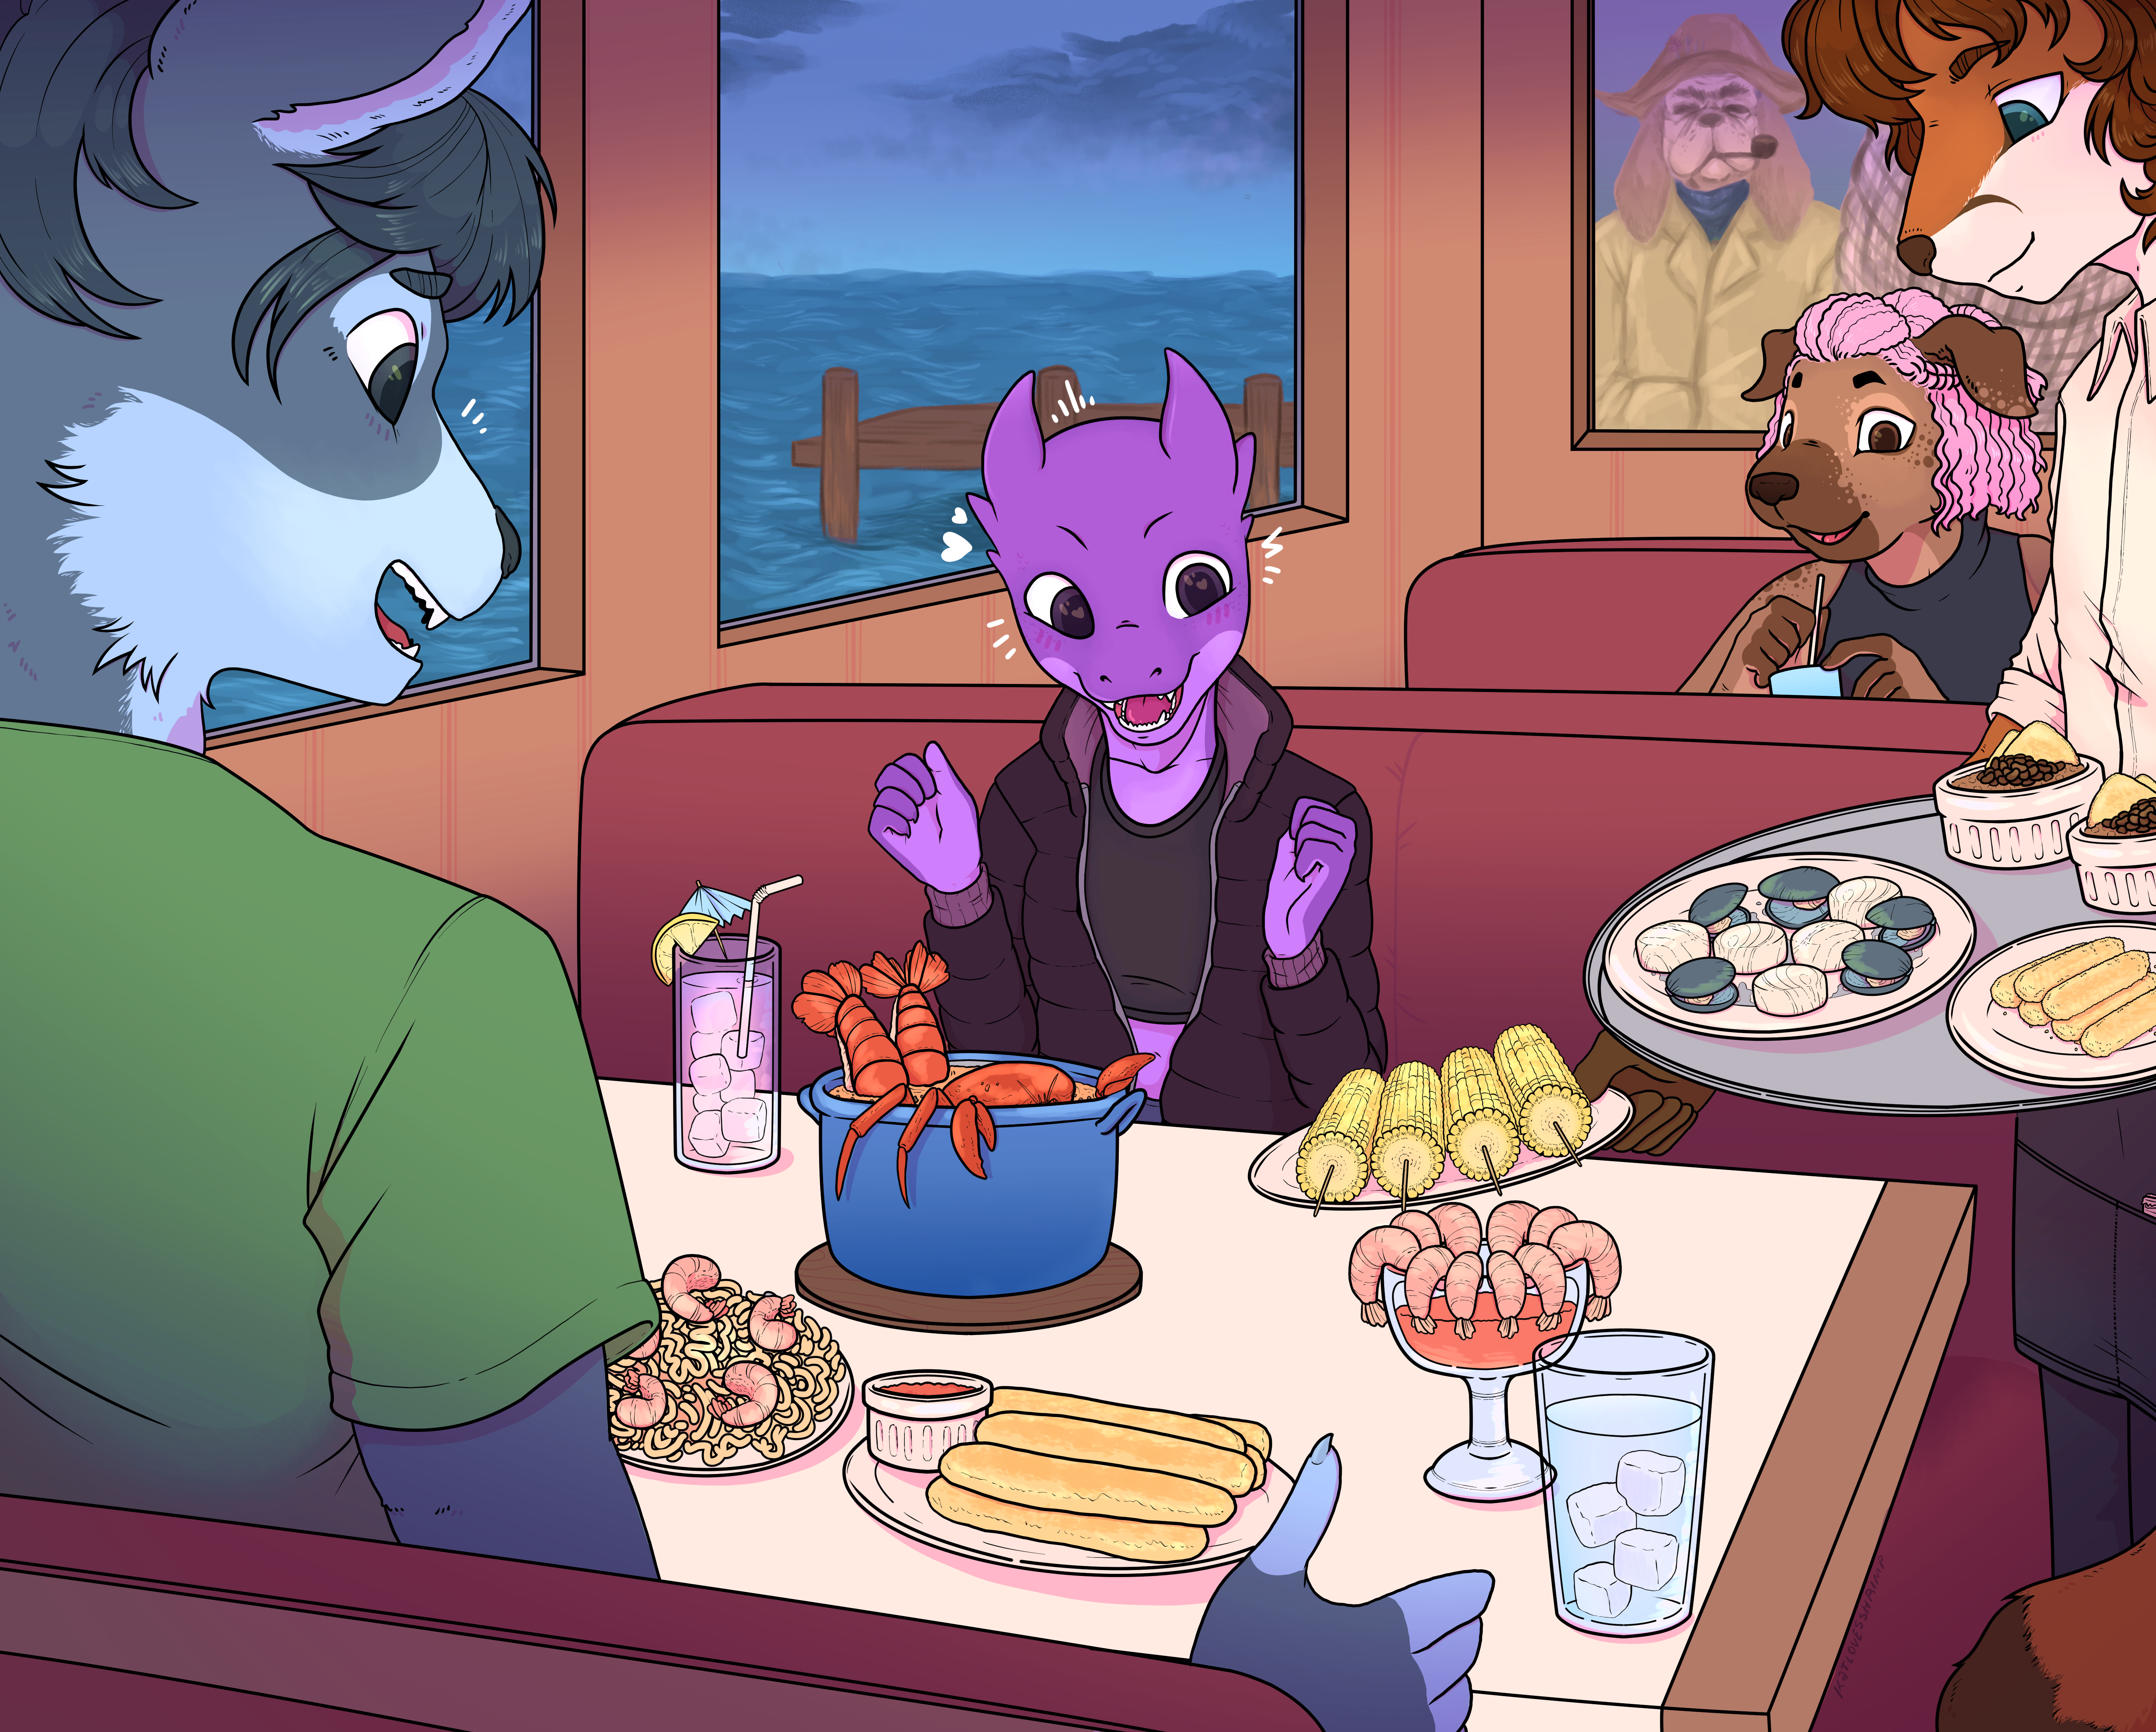 Kobold and wolf on a date commission